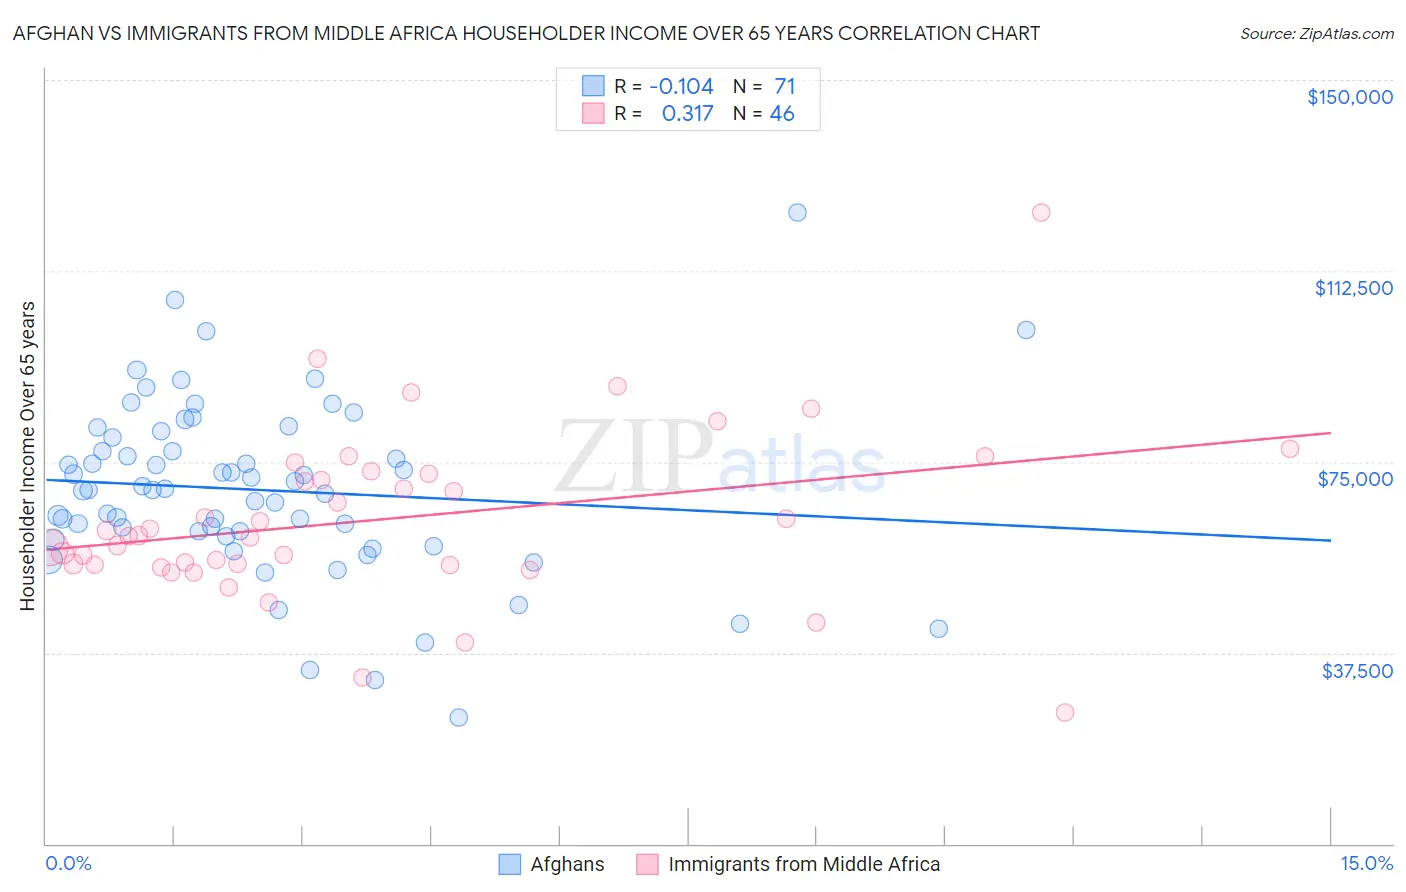 Afghan vs Immigrants from Middle Africa Householder Income Over 65 years